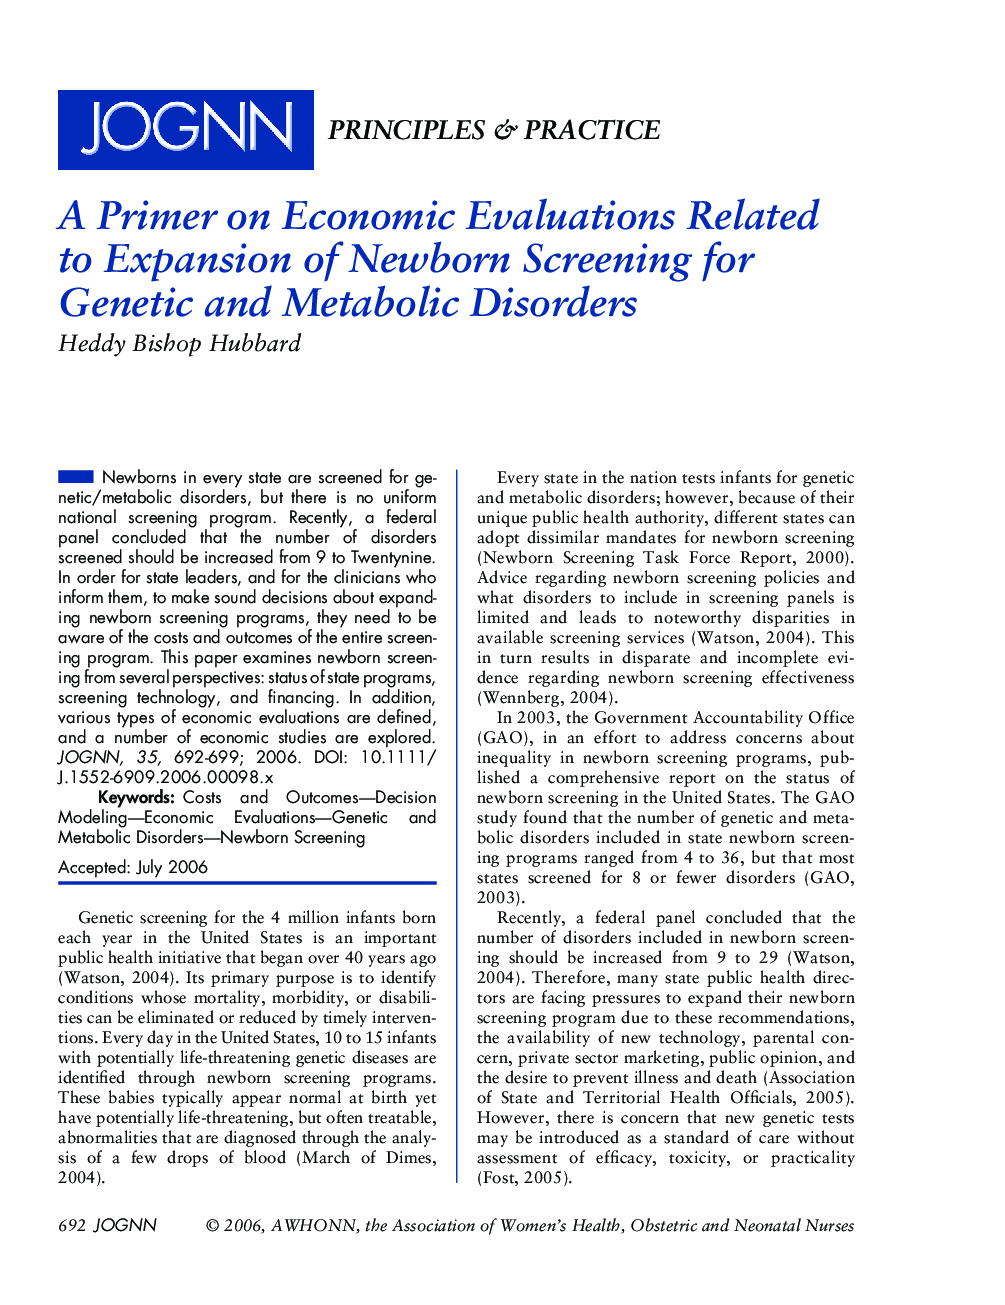 A Primer on Economic Evaluations Related to Expansion of Newborn Screening for Genetic and Metabolic Disorders